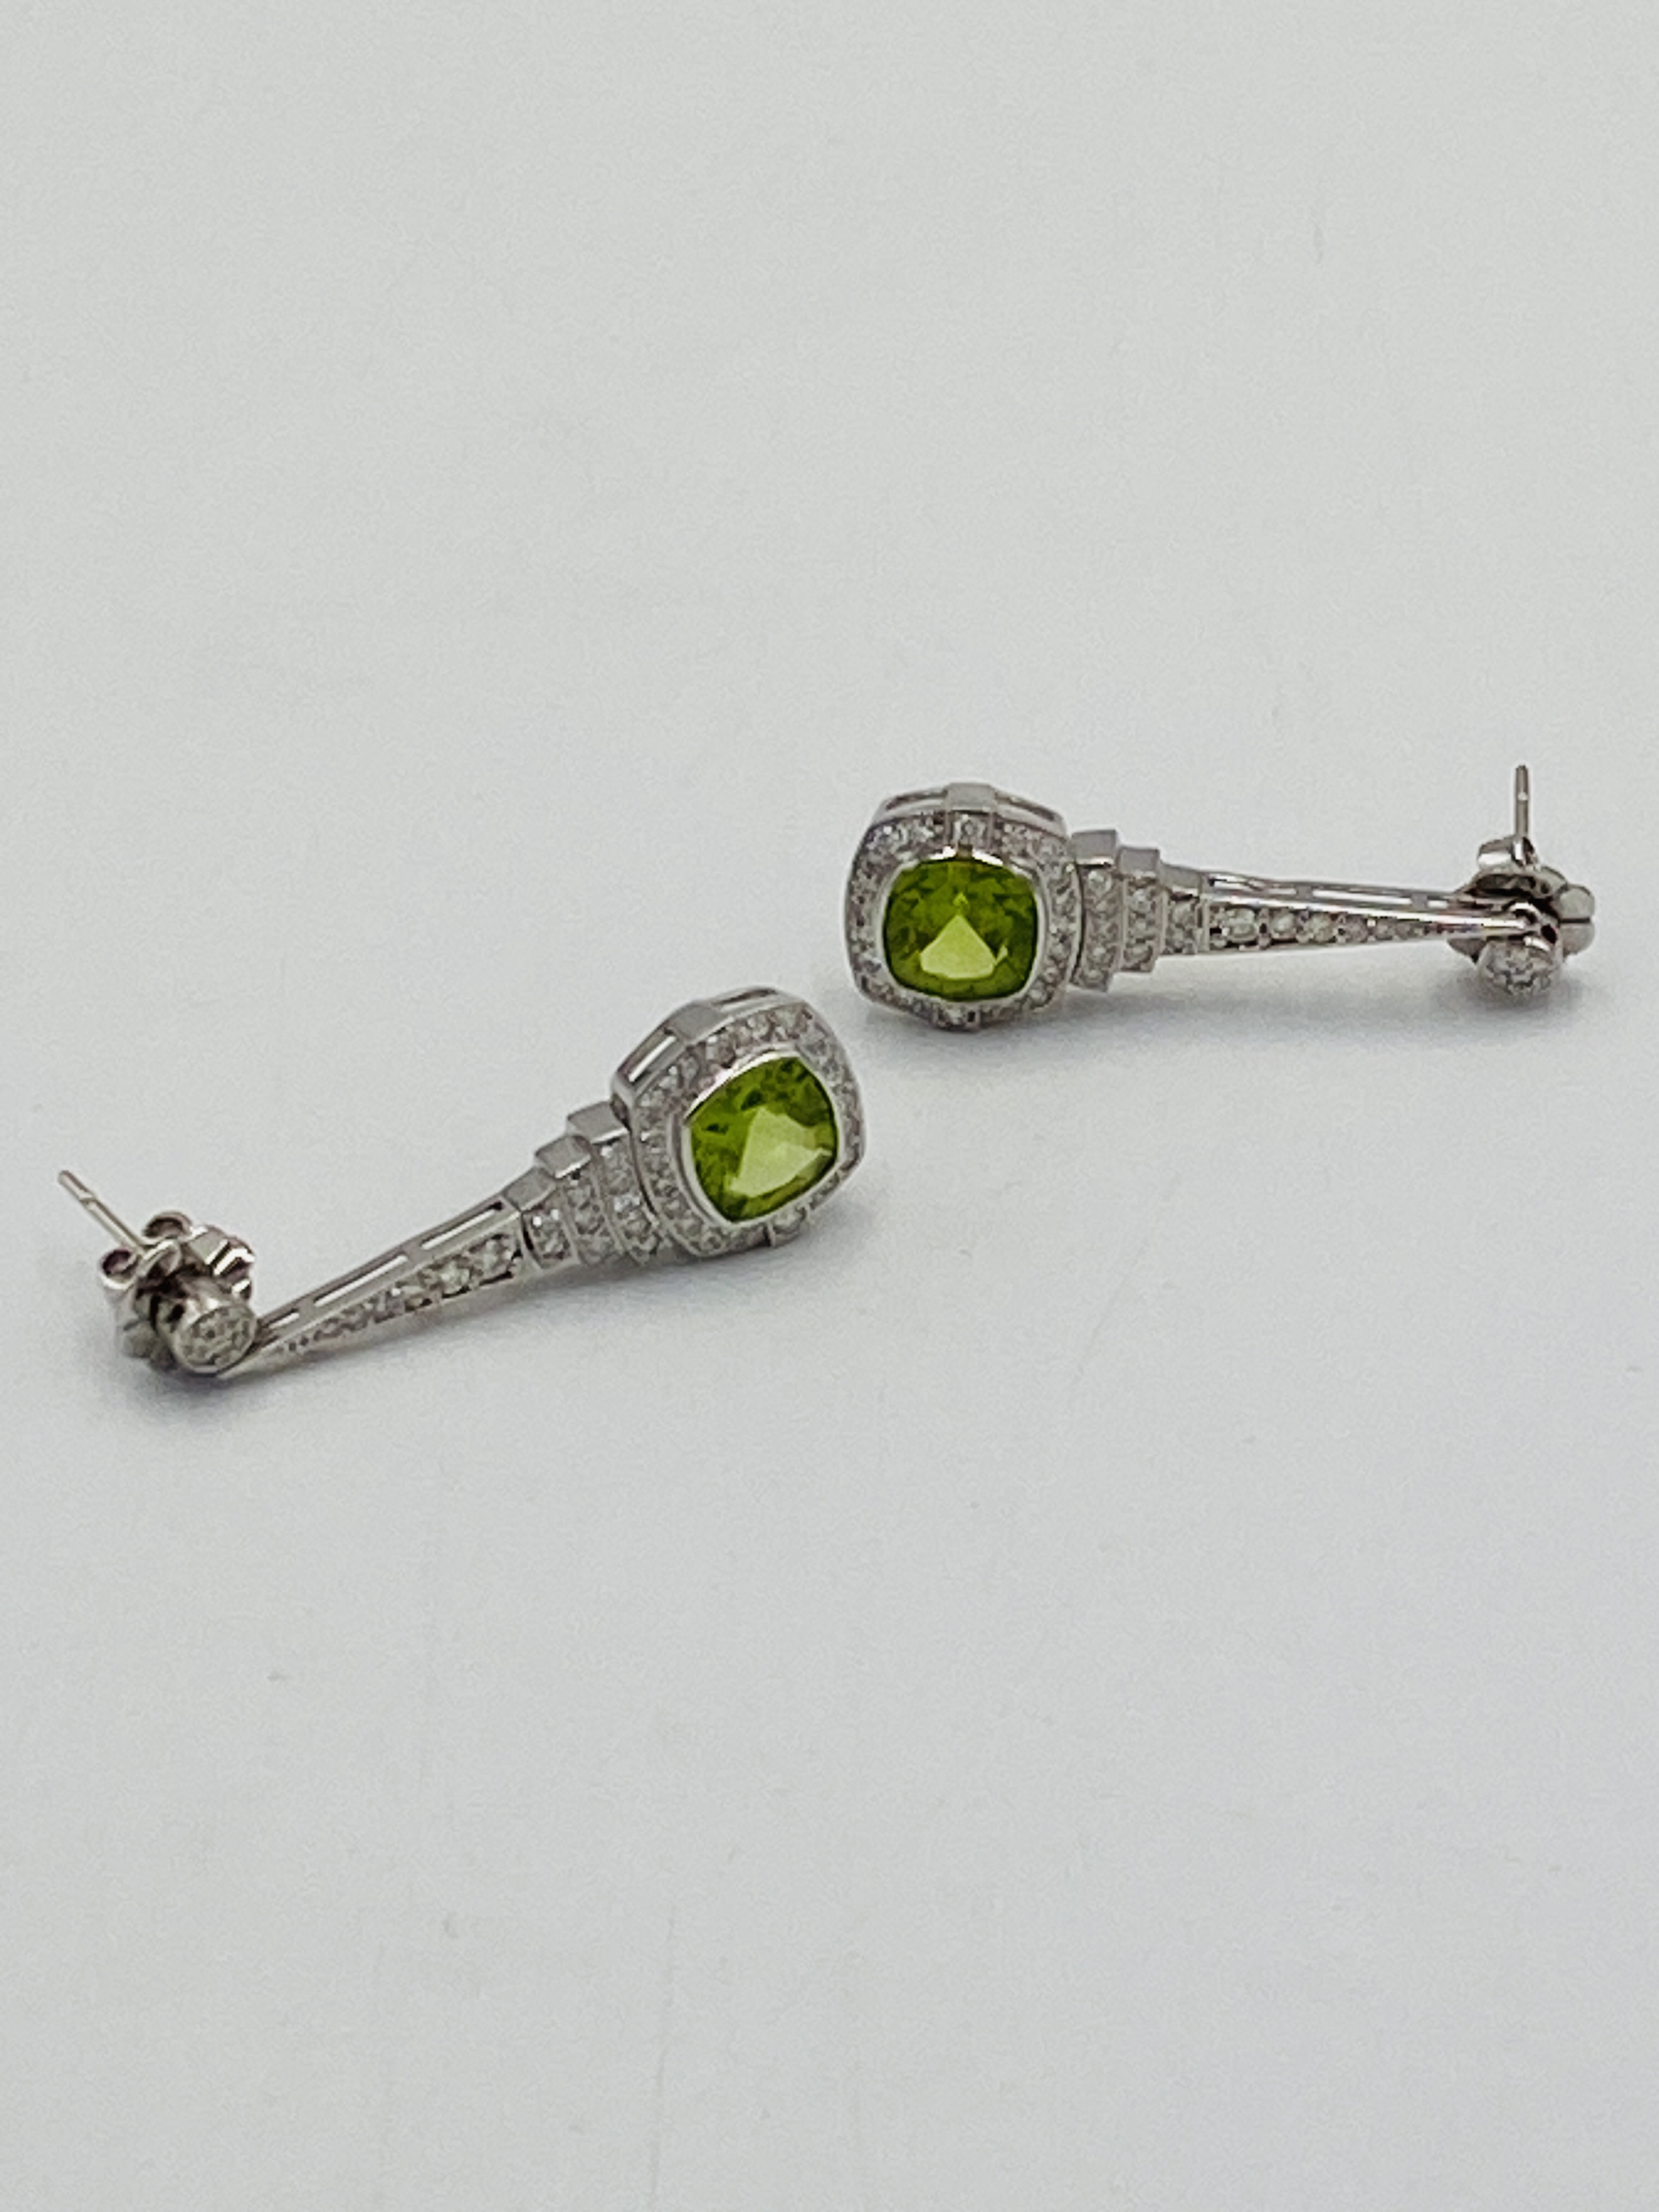 18ct white gold, diamond and green stone drop earrings - Image 5 of 8